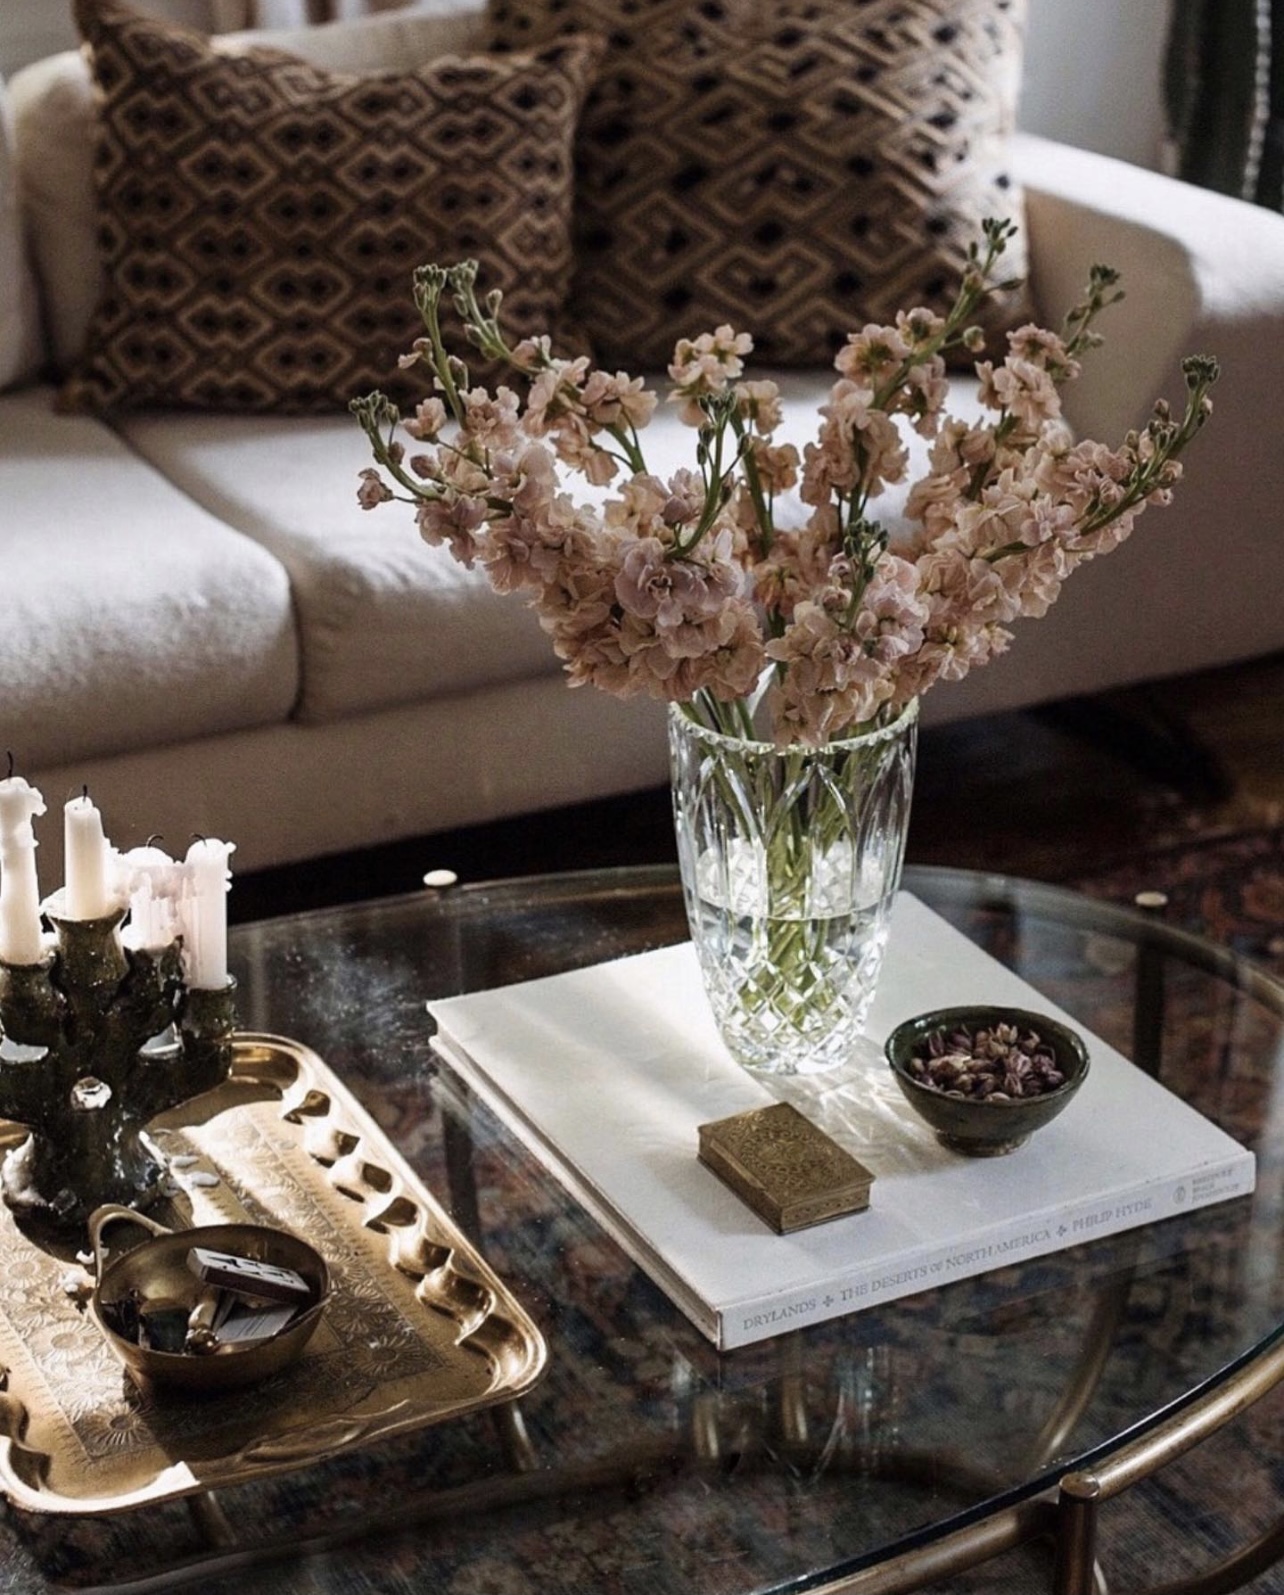 Décor Inspiration | At Home With: Photographer Carley Page Summers